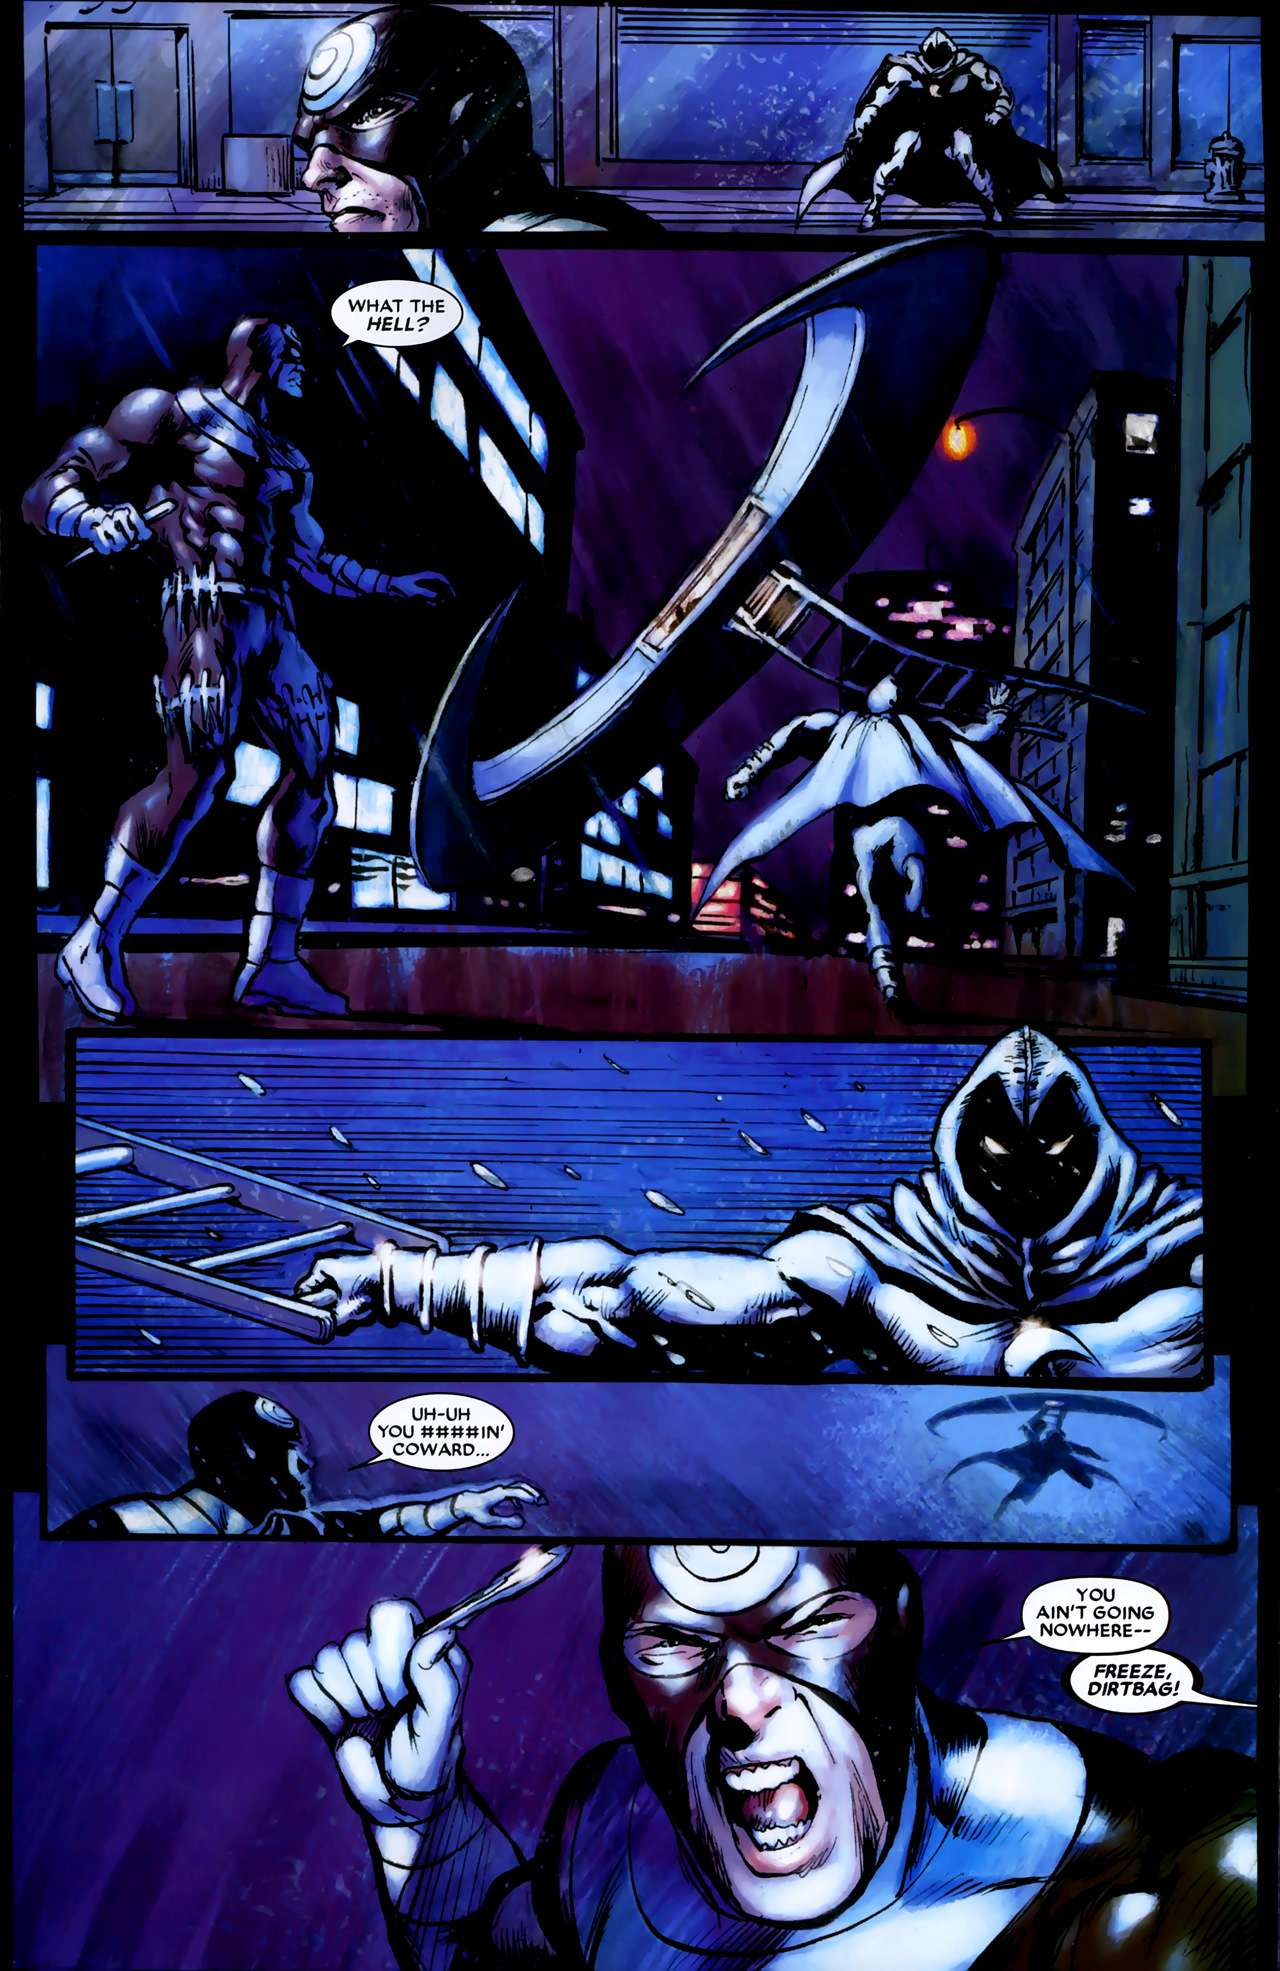 Moon Knight #25 - The Death Of Marc Spector, Part 5: Conclusion